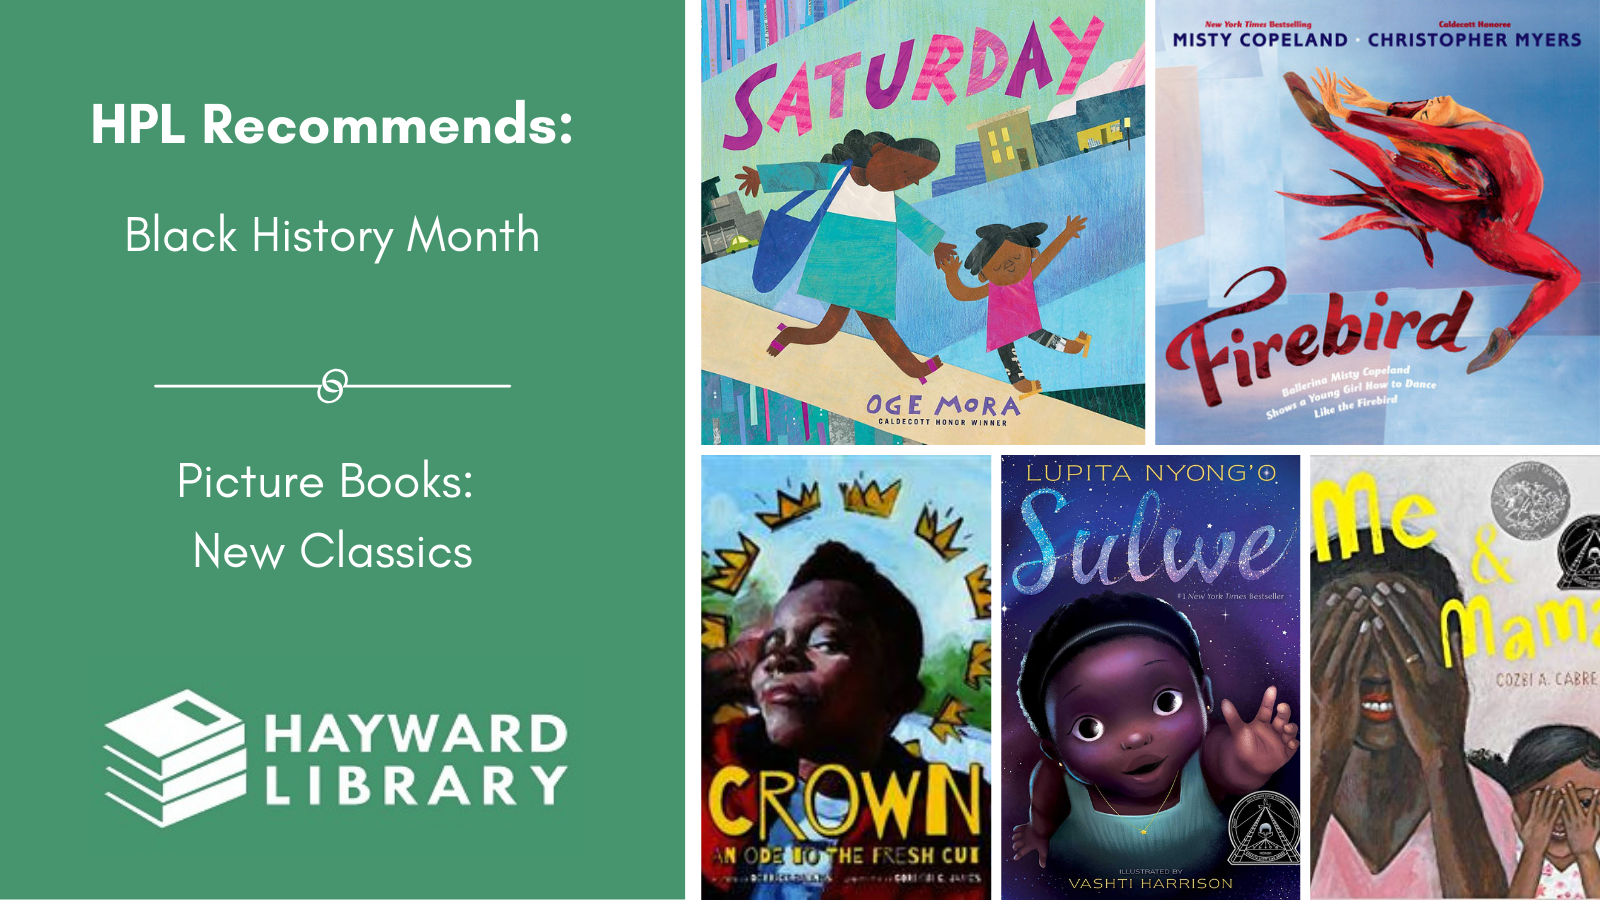 Collage of book covers with a green block on left side that says HPL Recommends, Black History Month, Picture Books: New Classics in white text, with Hayward Library logo below it.